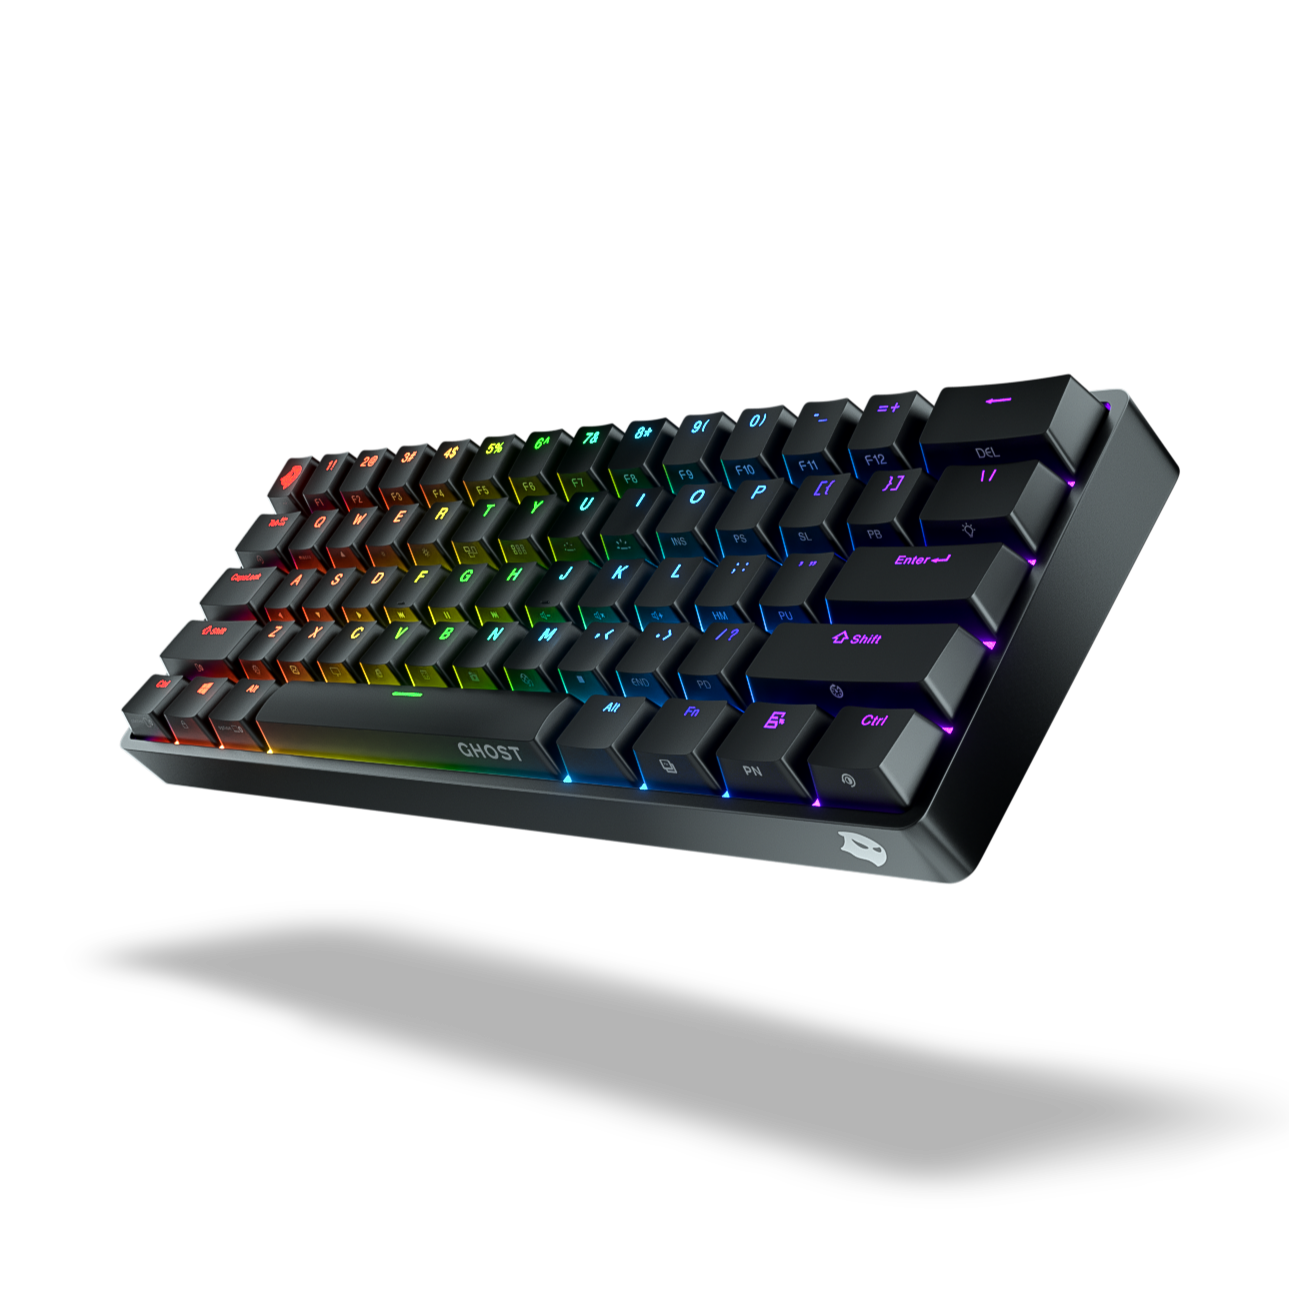 Ghost A1 Aluminum - Keyboard & Mouse Combo